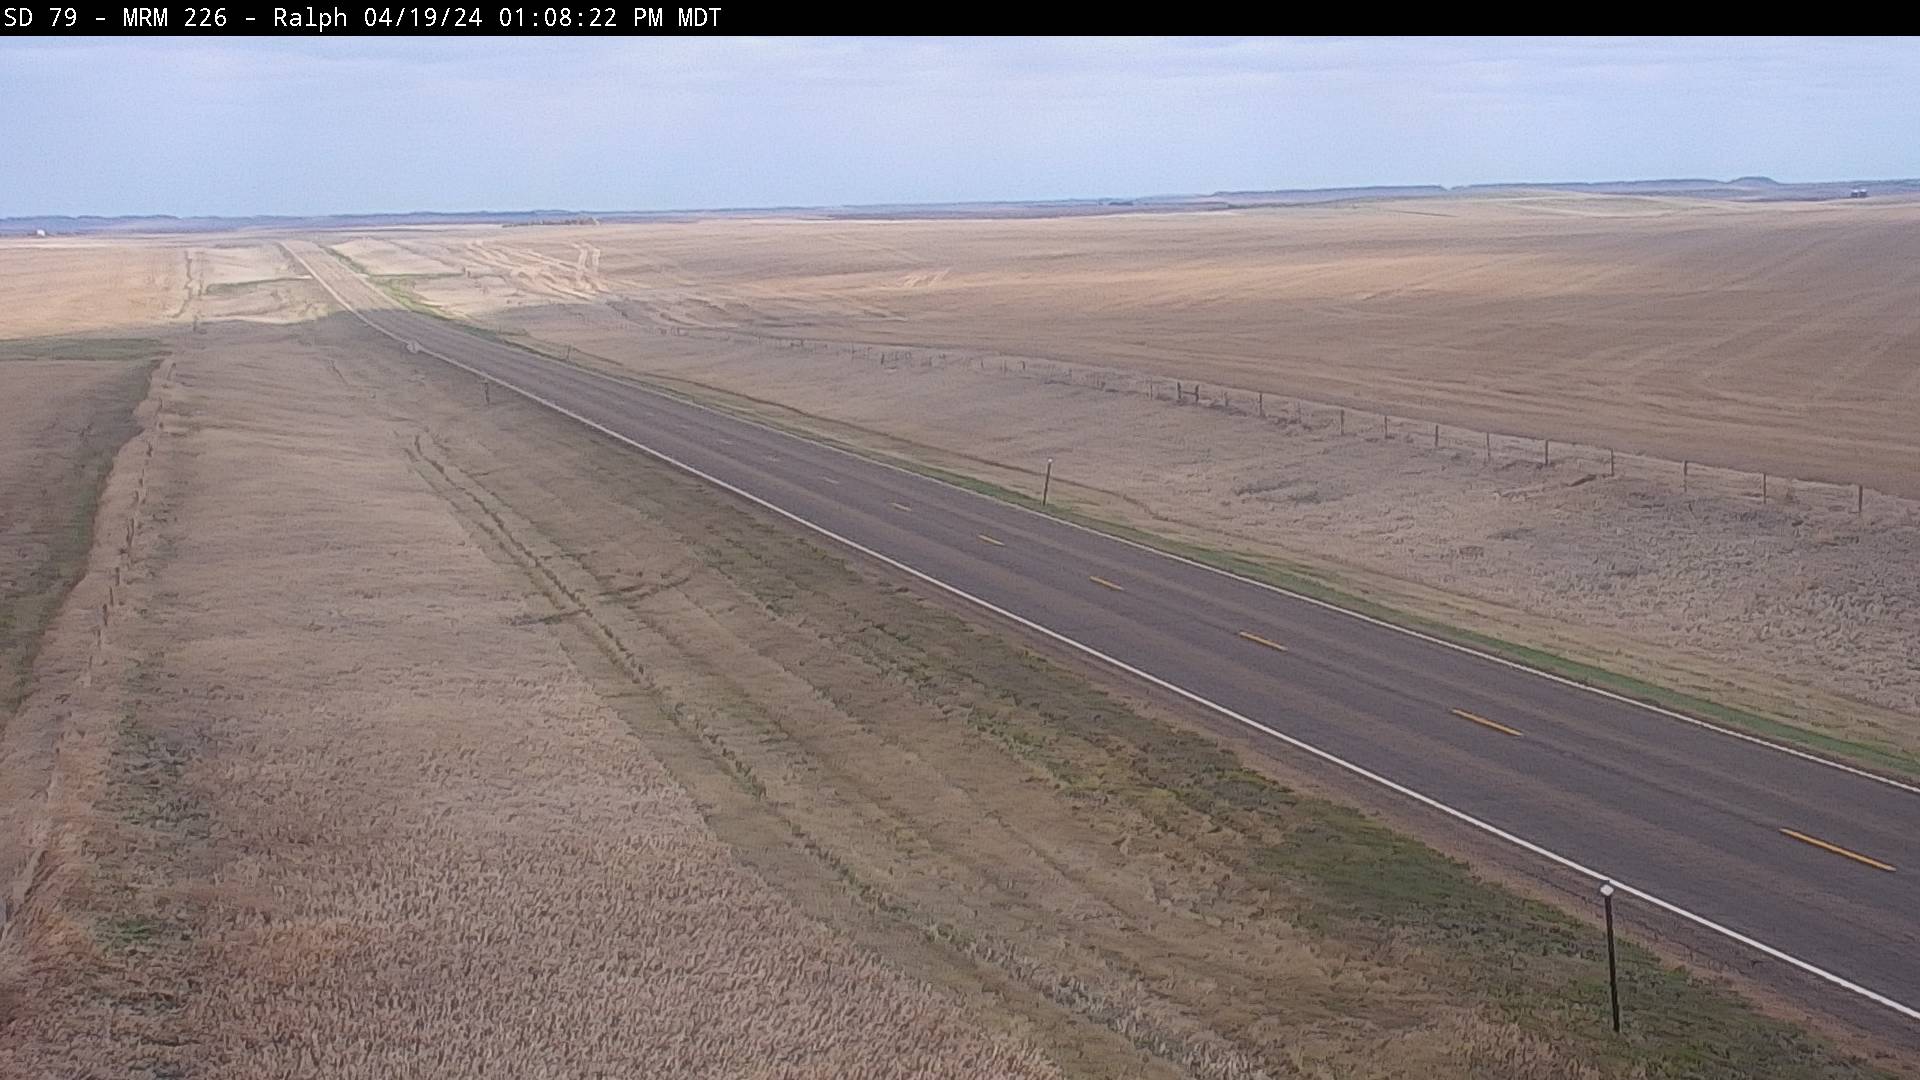 Traffic Cam north of town along SD-79 @ MP 226 - North Player